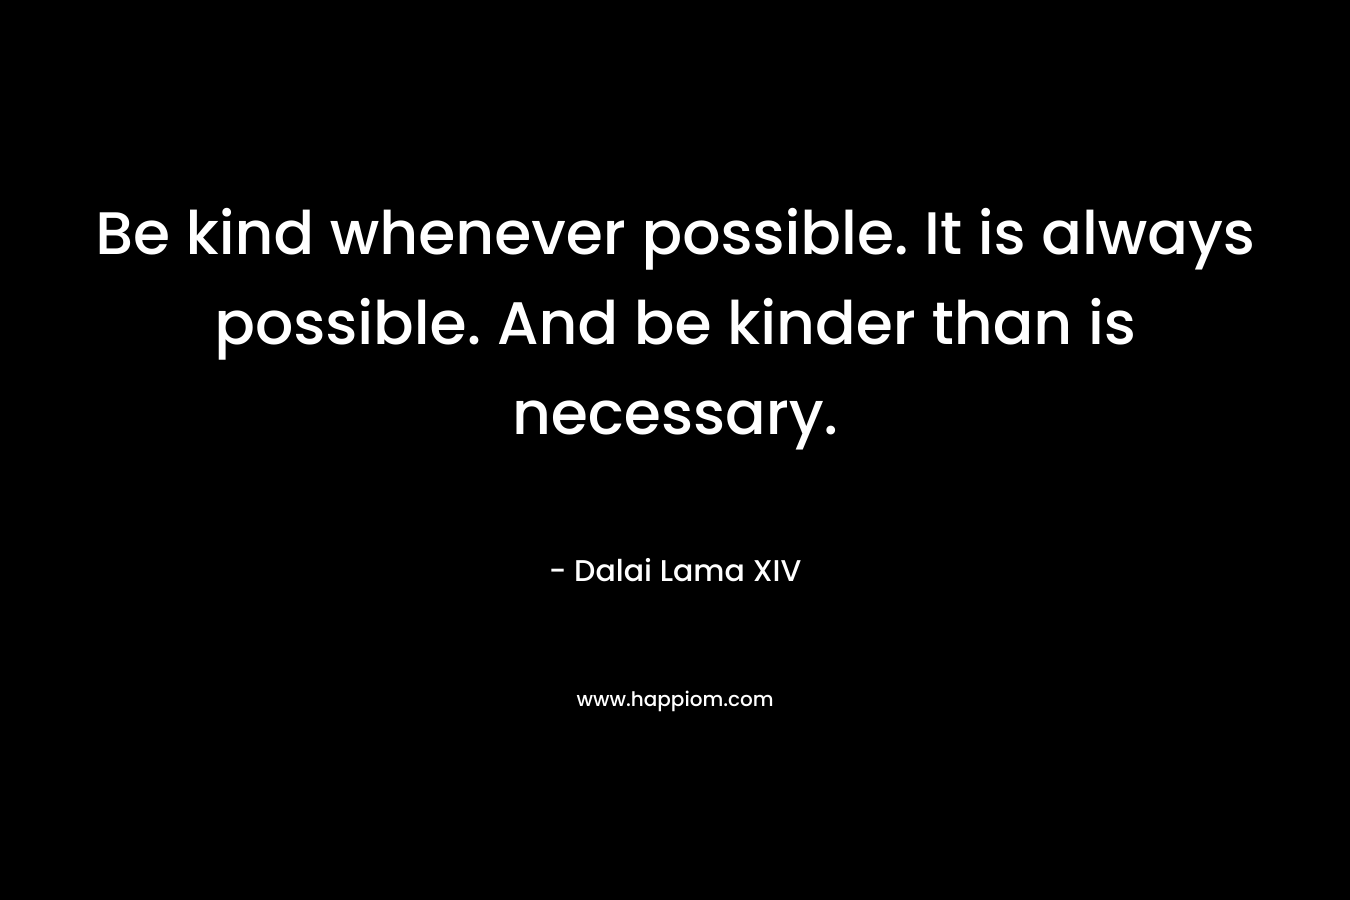 Be kind whenever possible. It is always possible. And be kinder than is necessary.